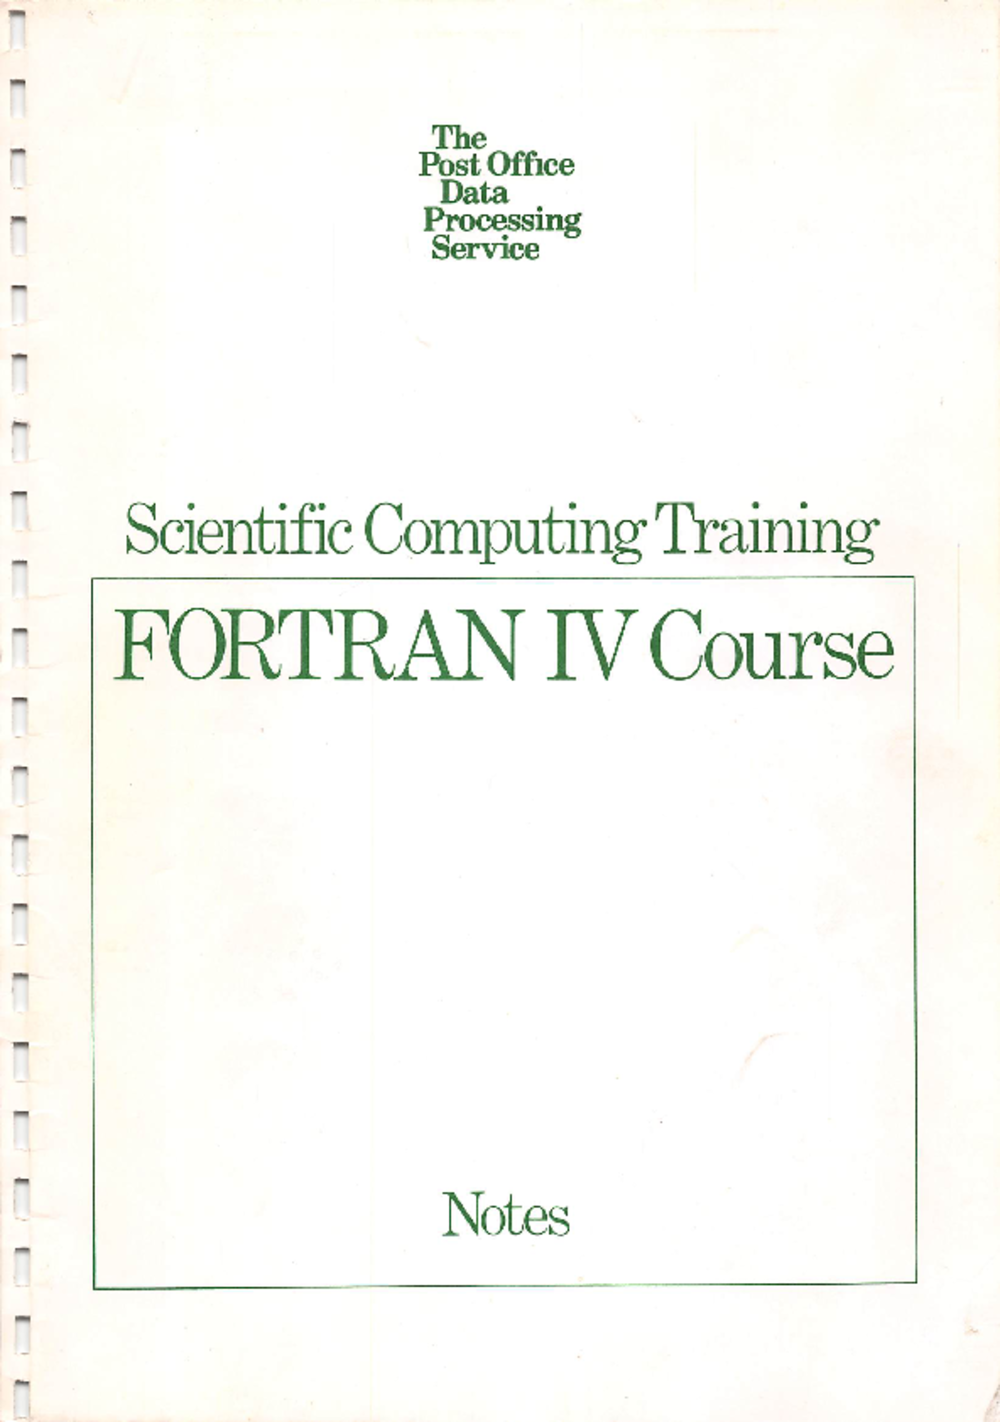 Article: The Post Office Data Processing Service - Scientific Computing Training - FORTRAN IV Course